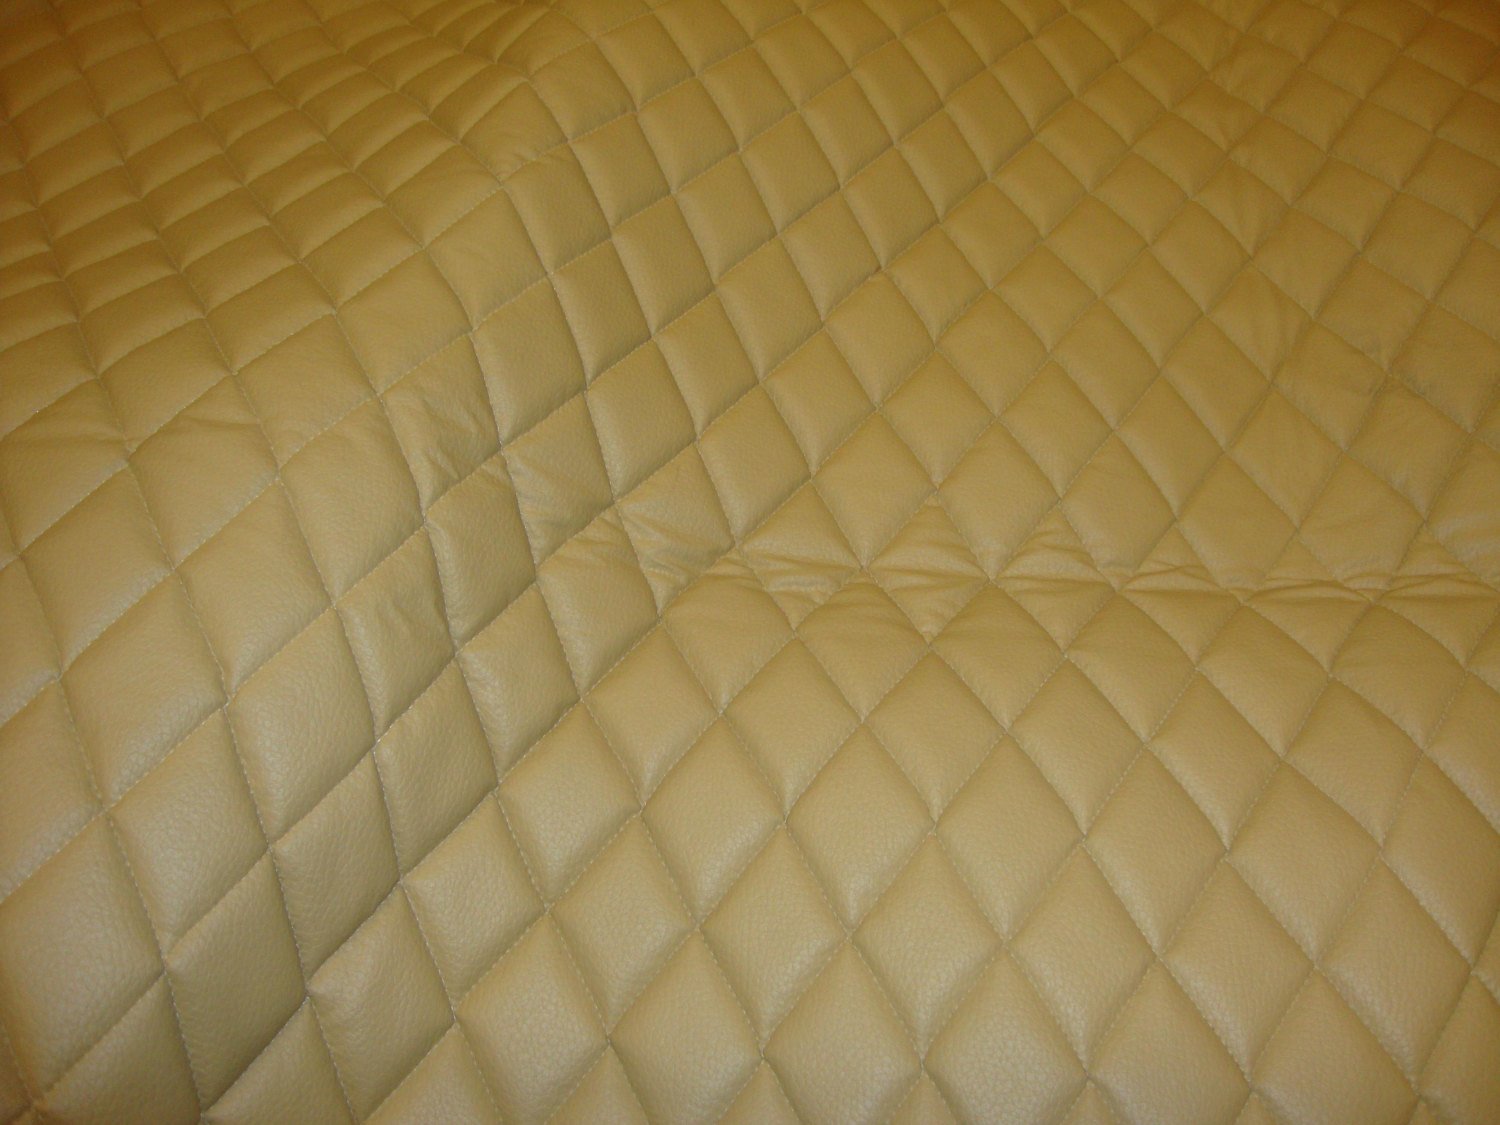 camel-diamond-quilted-faux-leather-vinyl-3-8-foam-backing-54-wide-upholstery-fabric-by-the-yard